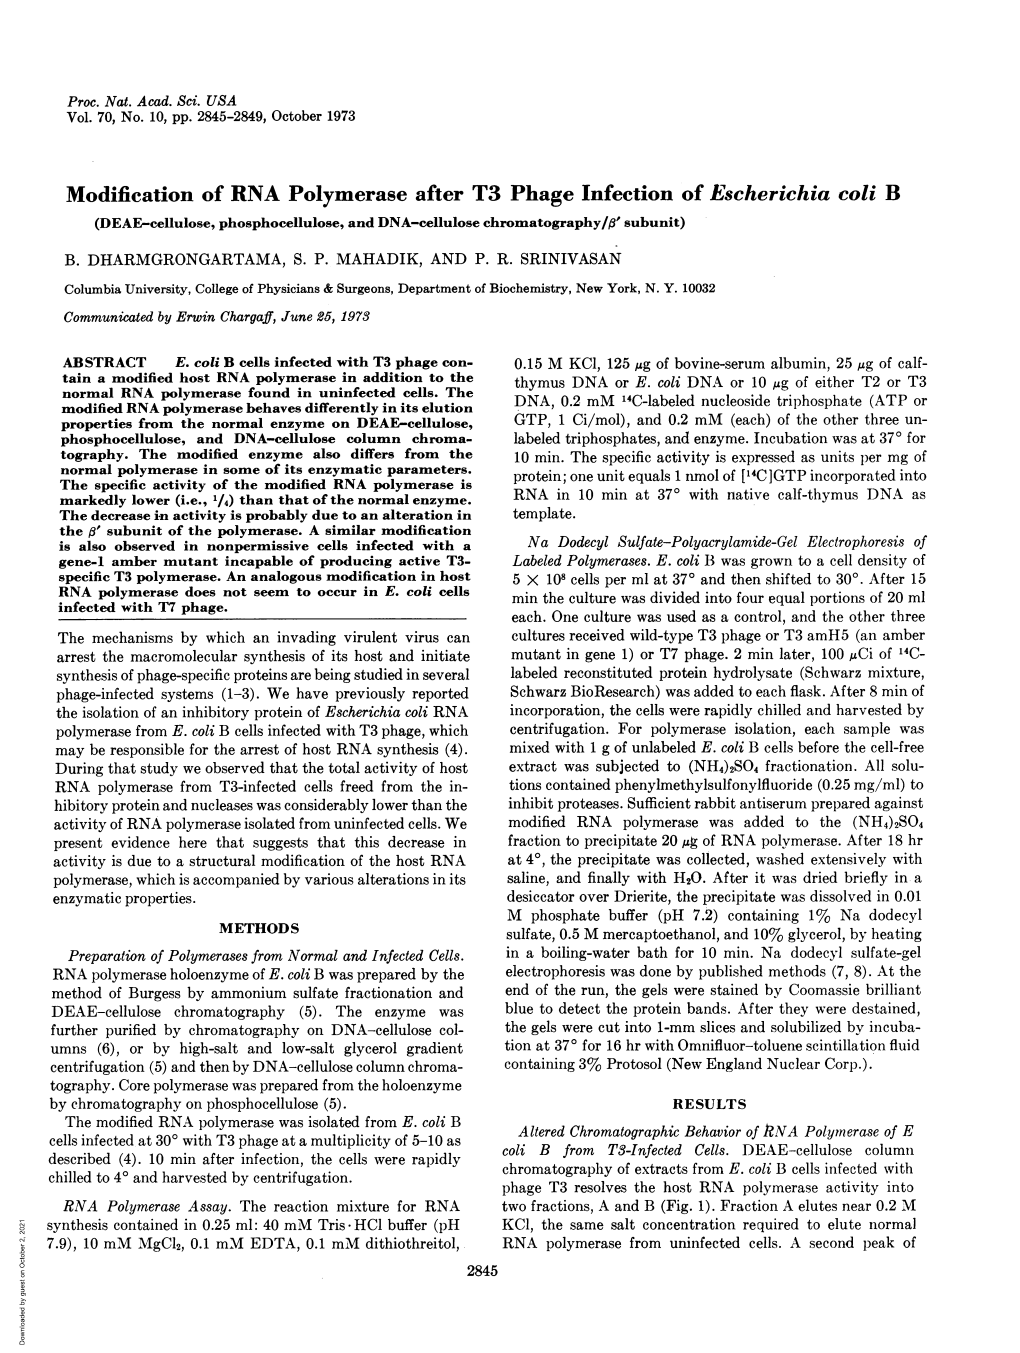 Modification of RNA Polymerase After T3 Phage Infection of Escherichia Coli B (DEAE-Cellulose, Phosphocellulose, and DNA-Cellulose Chromatography/H' Subunit)